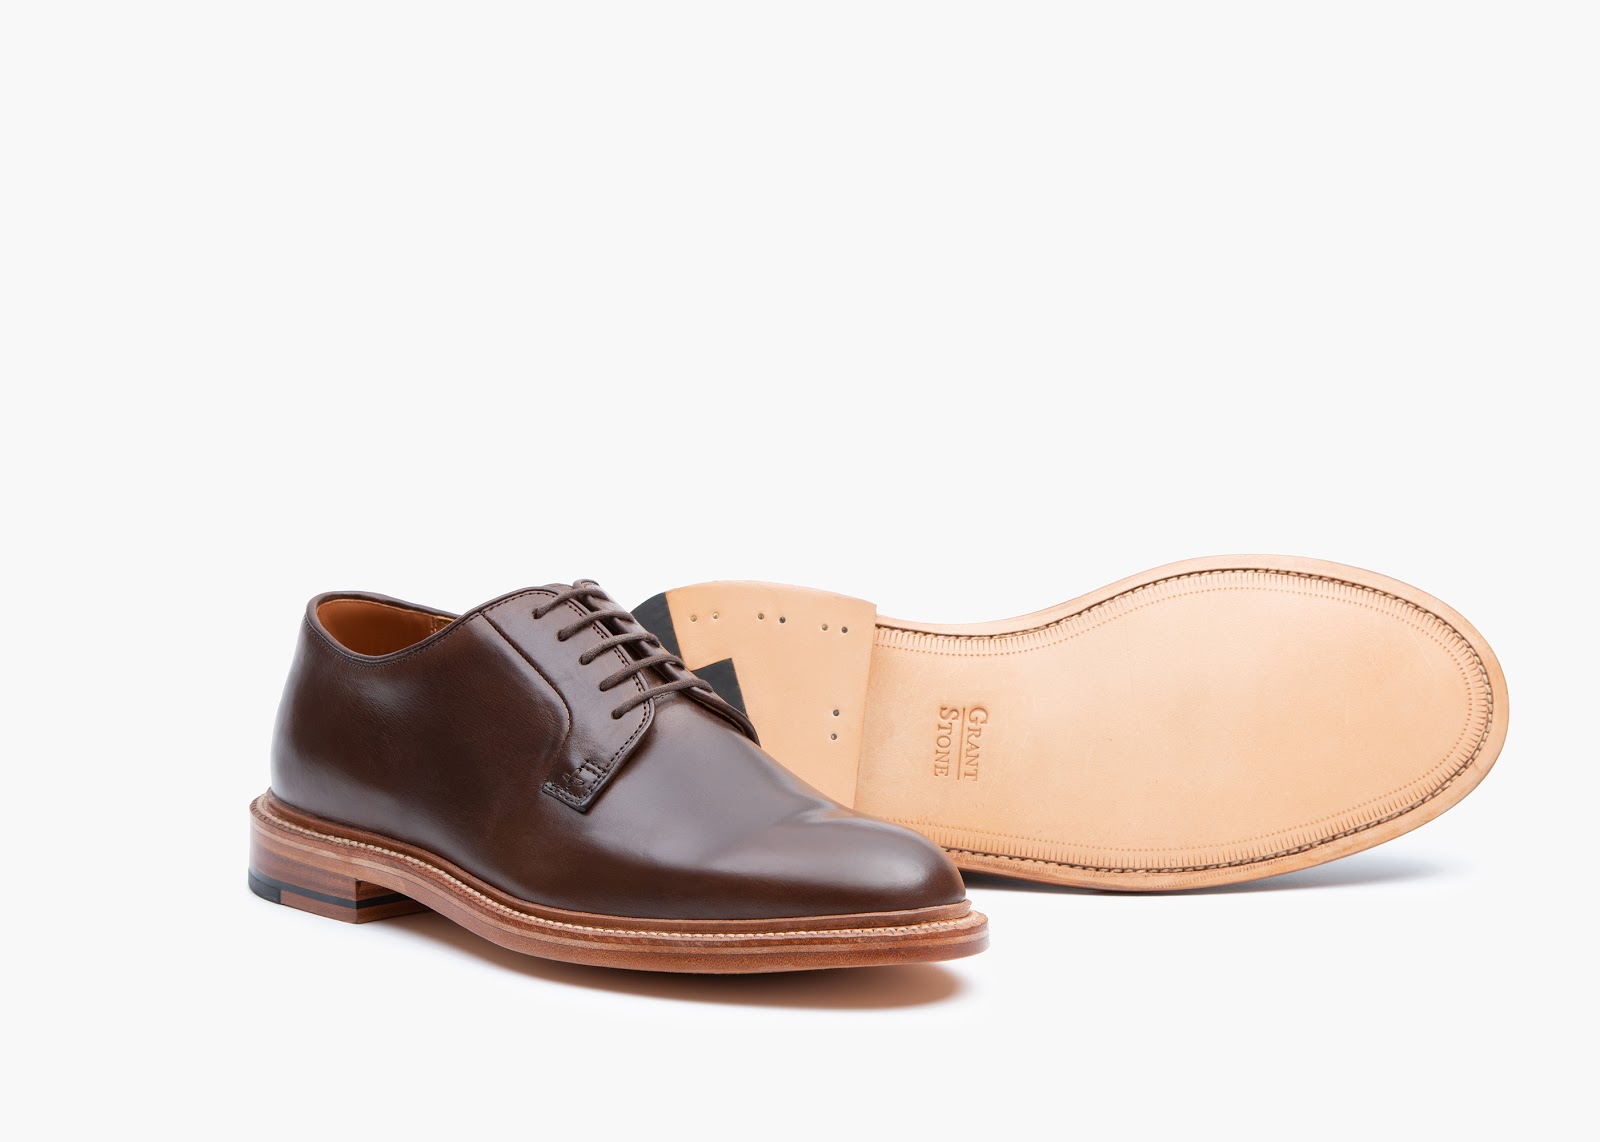 on-starting-a-business-casual-leather-shoes-brand-with-100-sales-growth-yoy